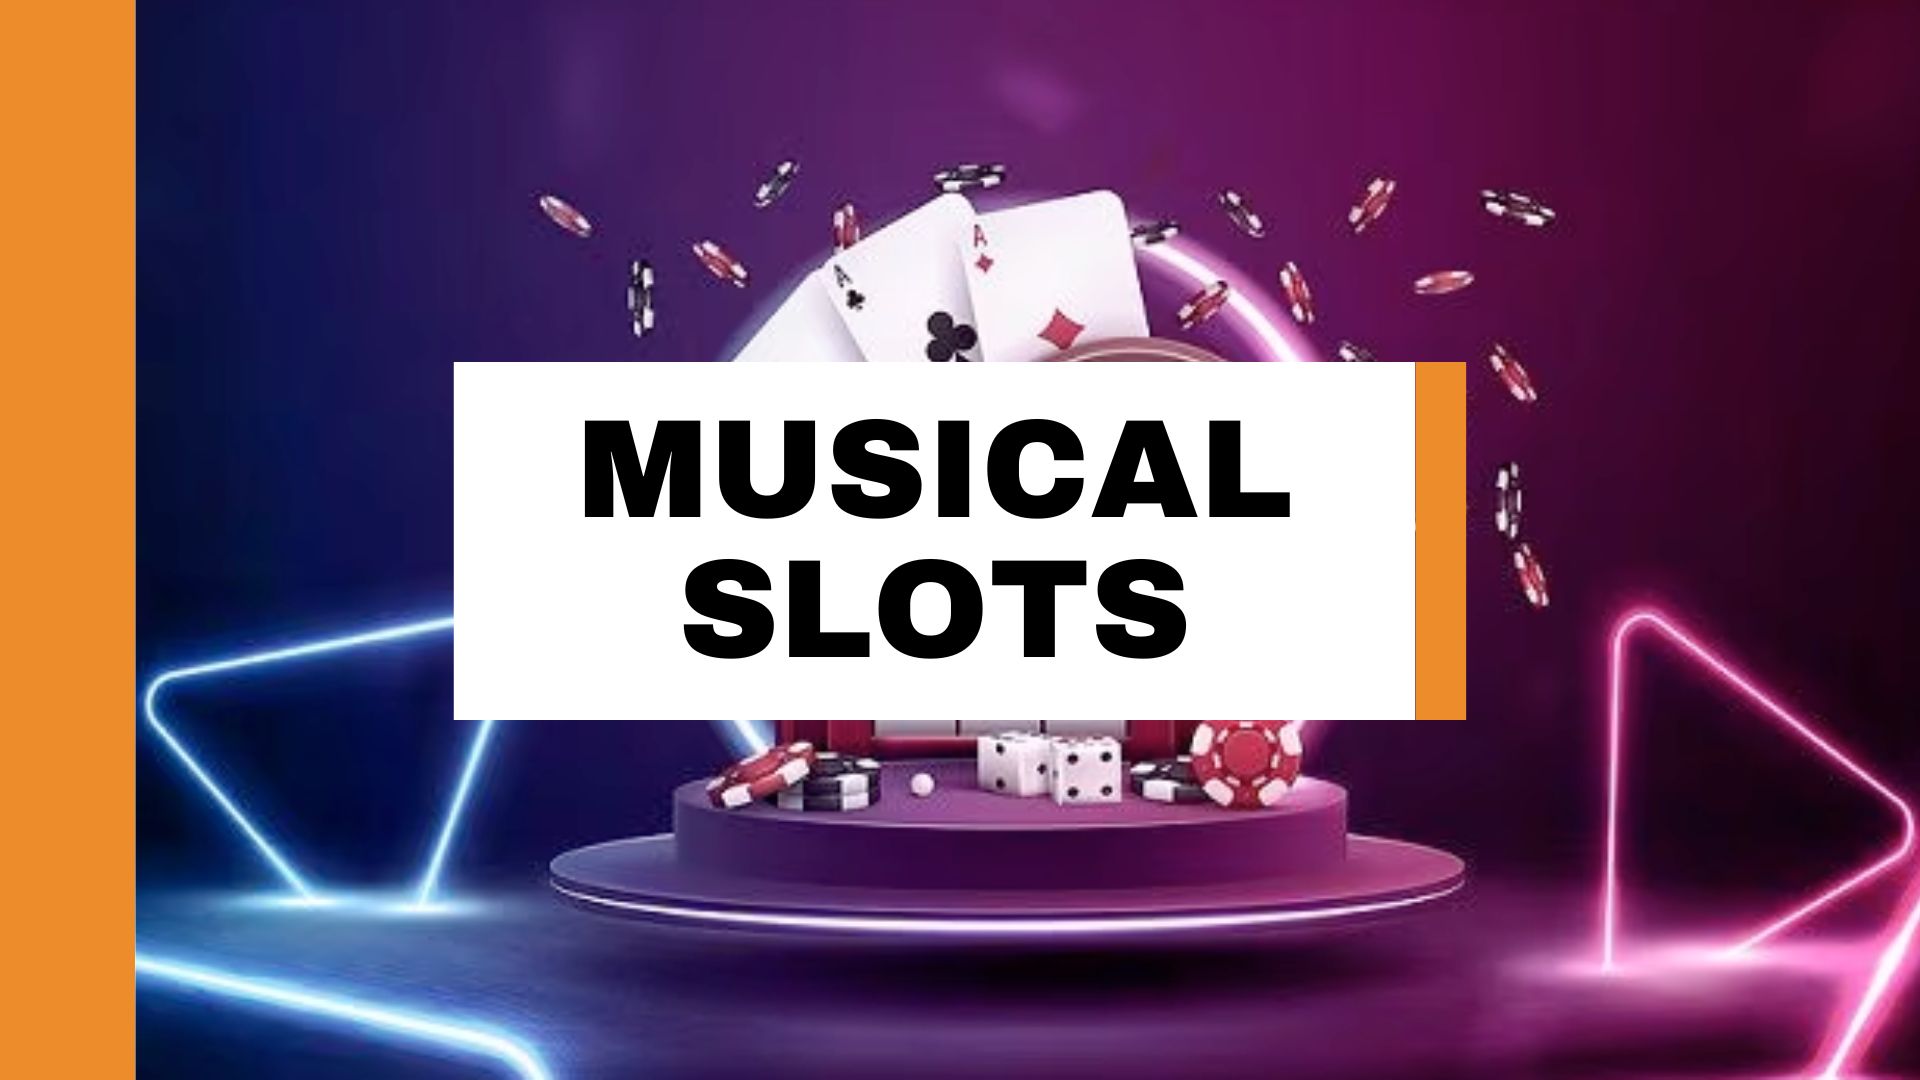 Musical Slots: Your Guide to the Best Rhythmic Gaming Experience